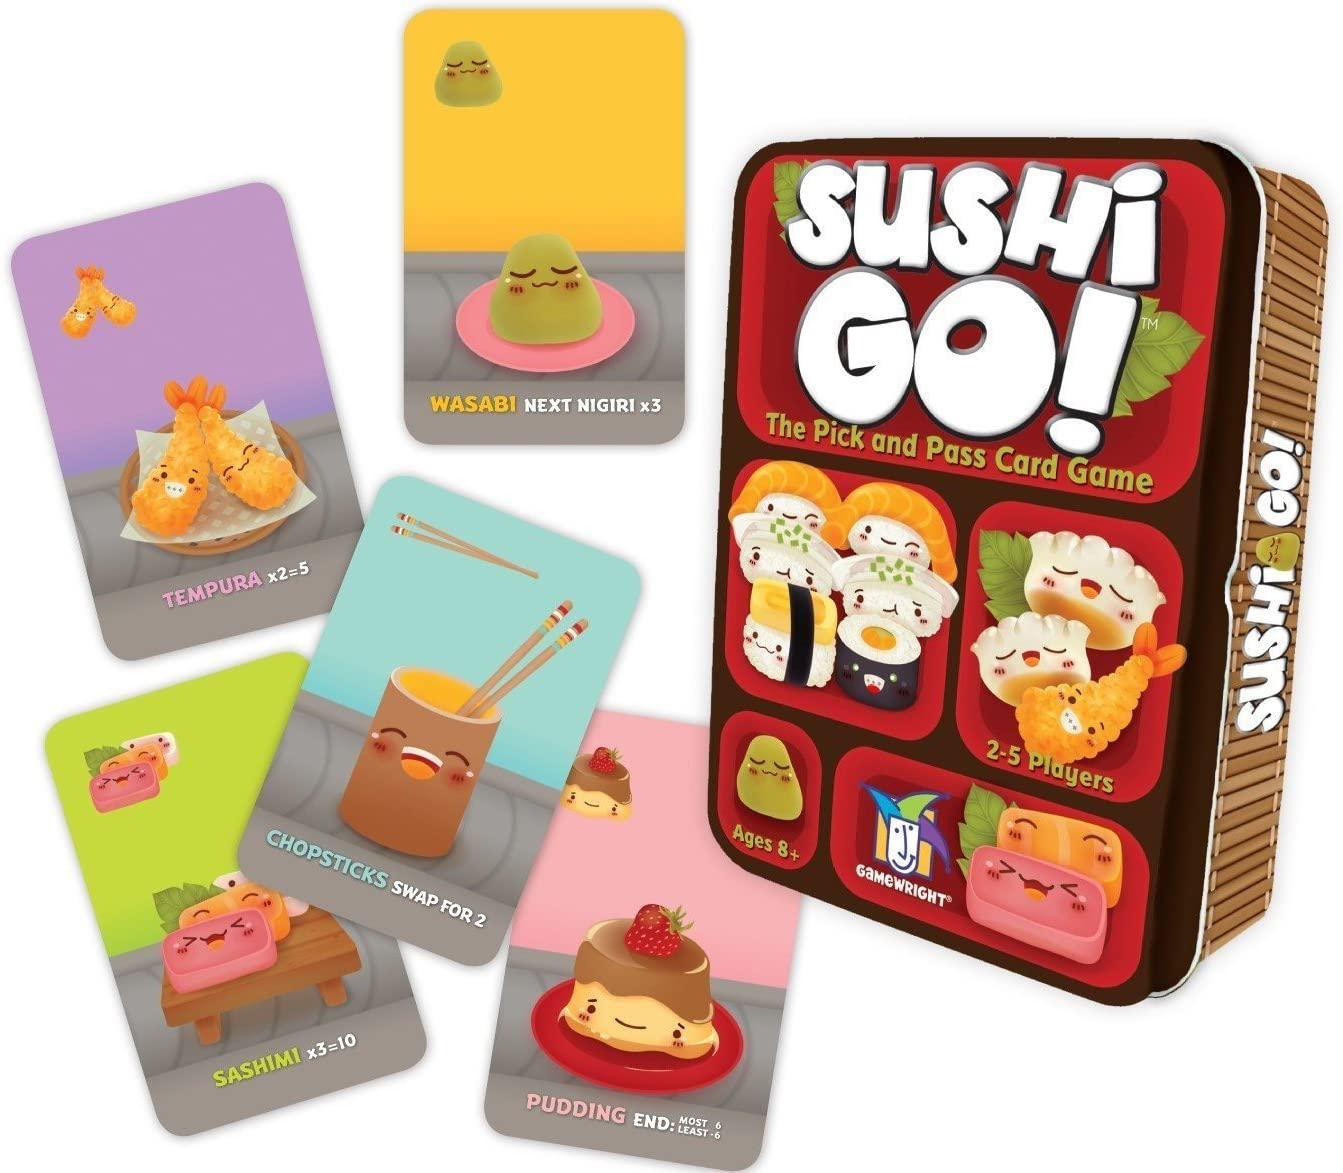 Sushi Go Card Game for $7.19